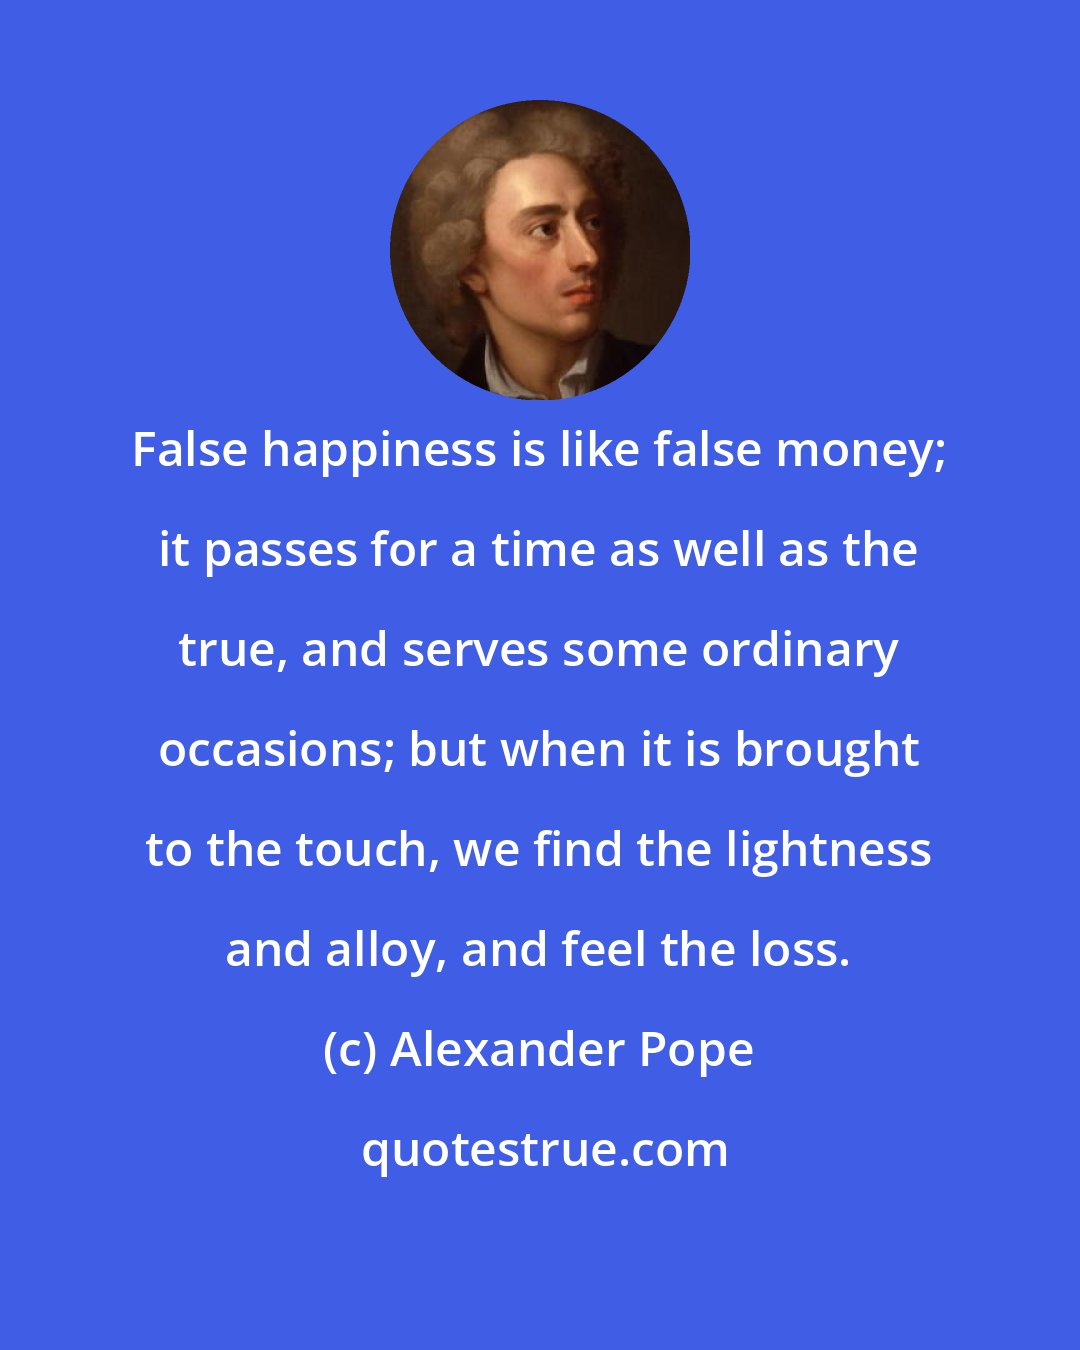 Alexander Pope: False happiness is like false money; it passes for a time as well as the true, and serves some ordinary occasions; but when it is brought to the touch, we find the lightness and alloy, and feel the loss.